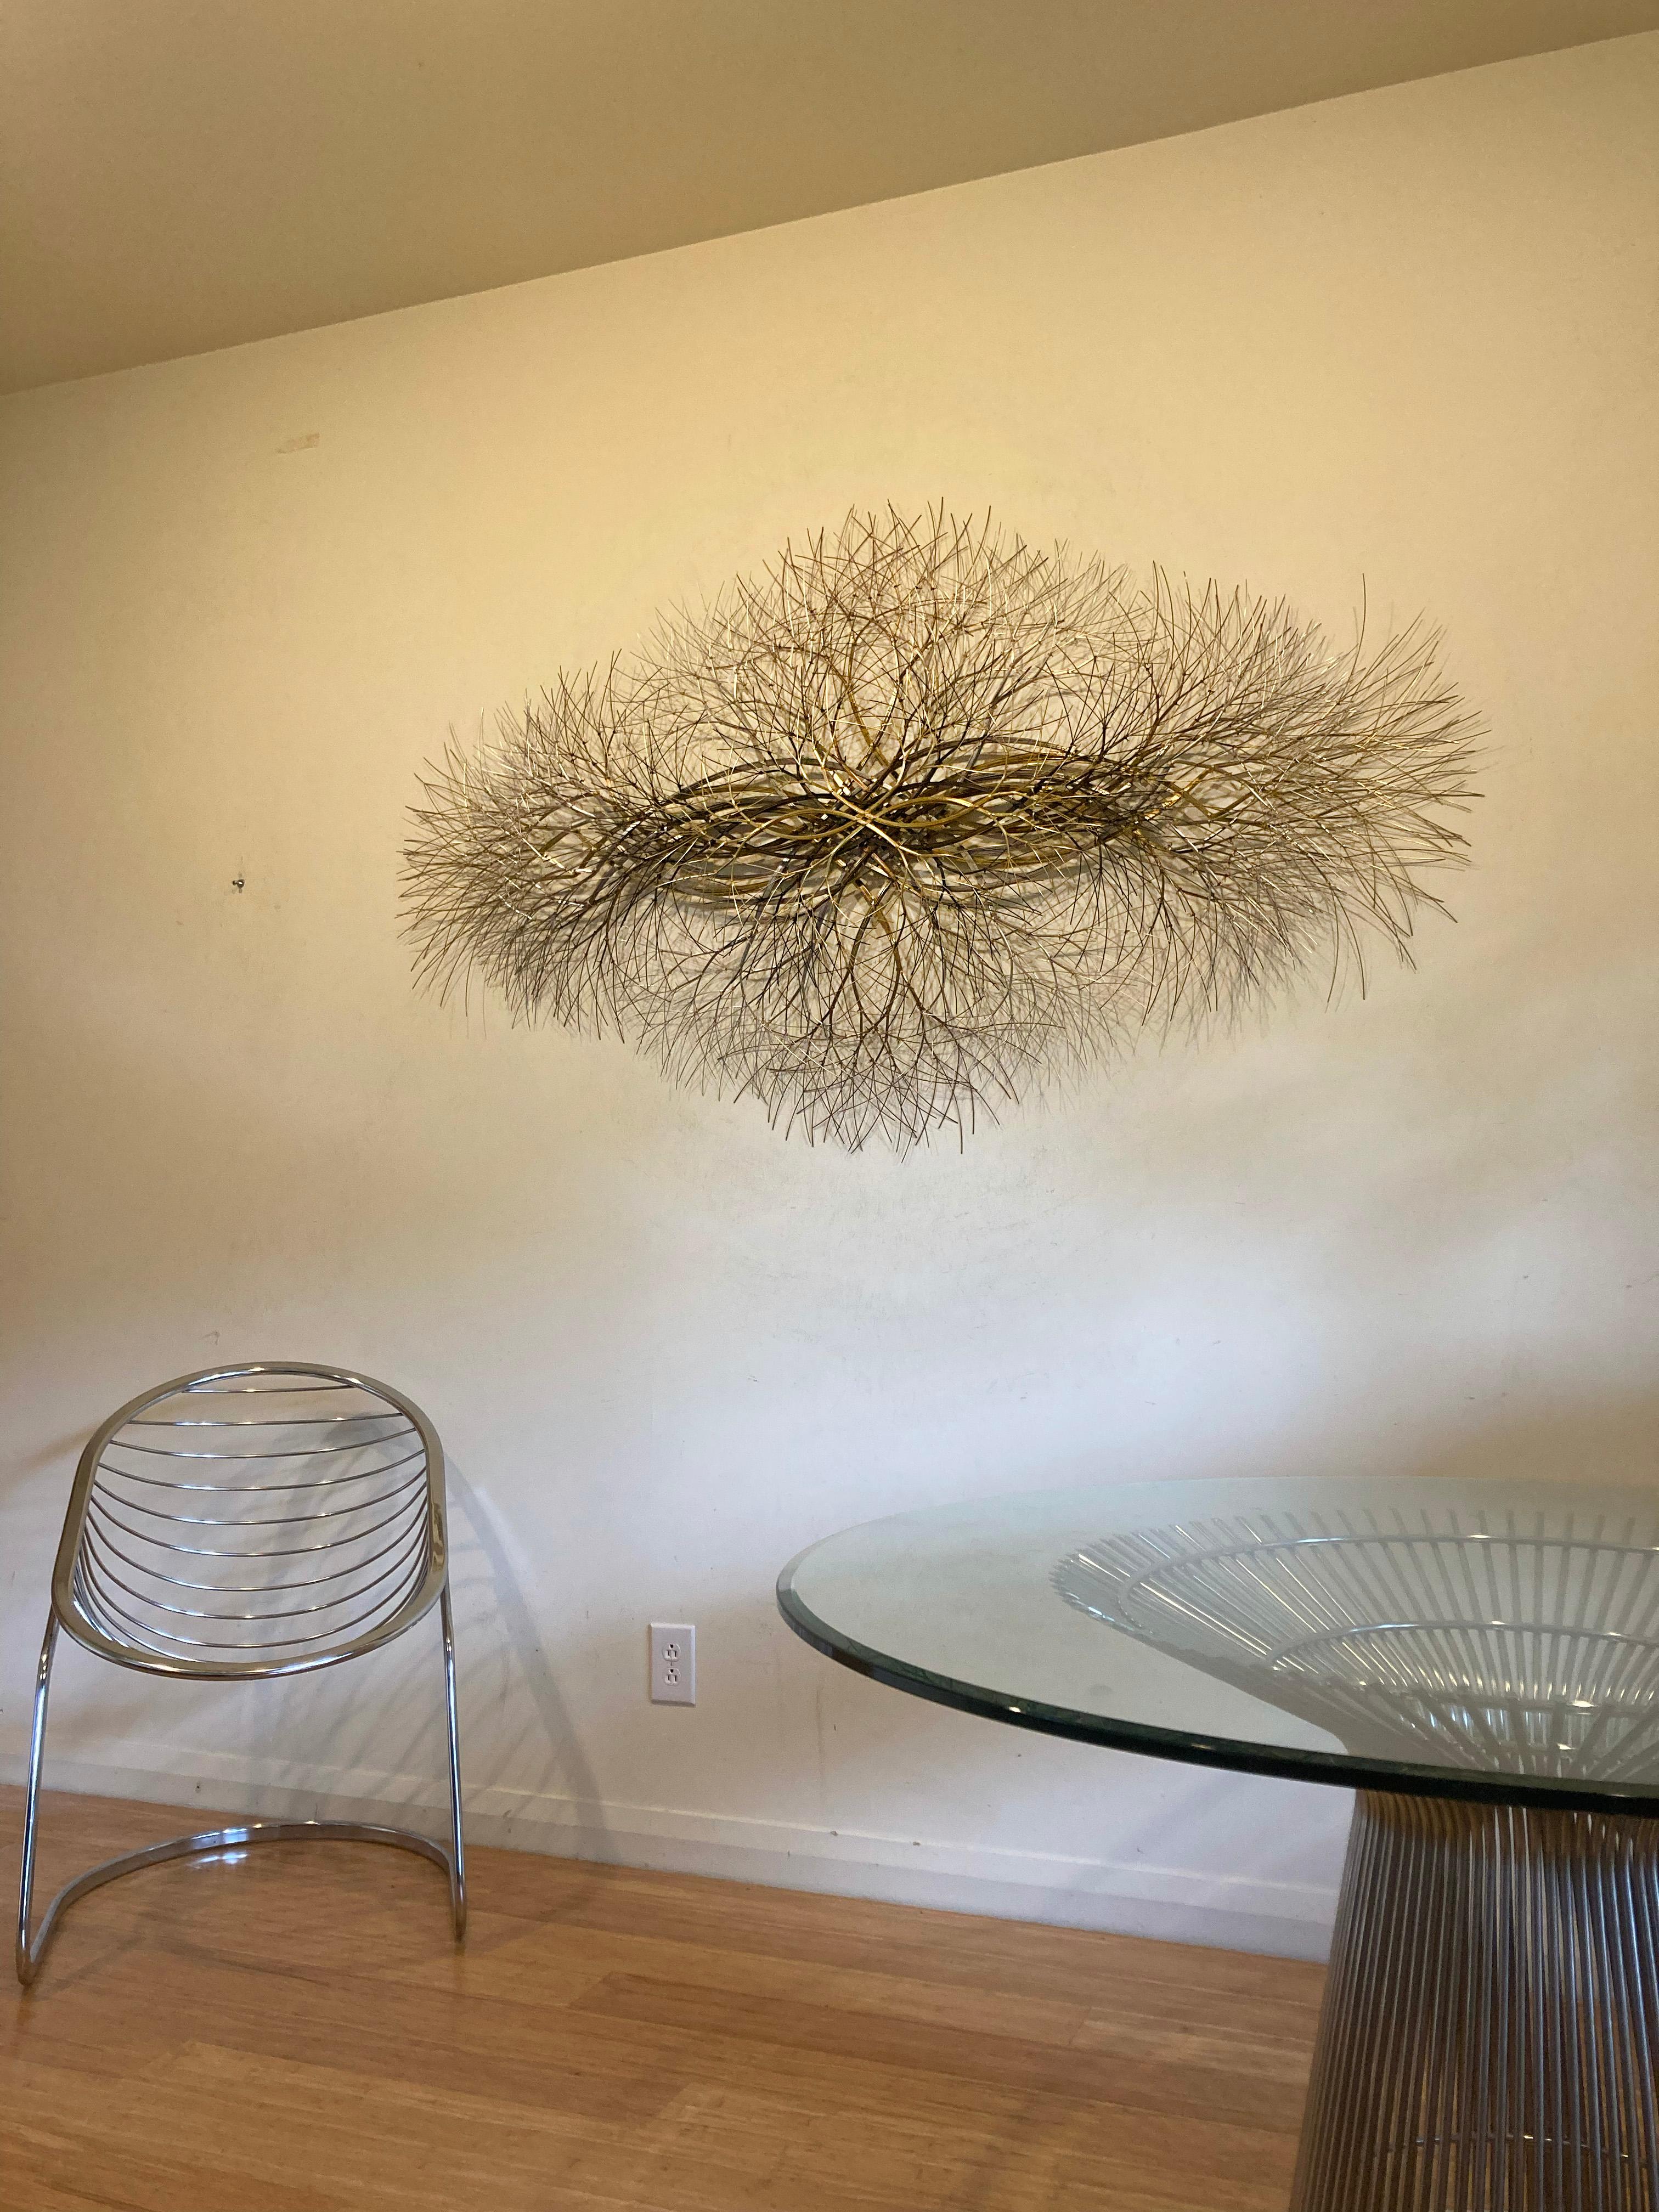 Bronze, brass, and stainless steel wire. 

This abstract sculpture is suitable for an entryway or perhaps a yoga studio or spiritual space. The artist uses a modern aesthetic reminiscent of trees, electricity, and light to create sculptures of peace